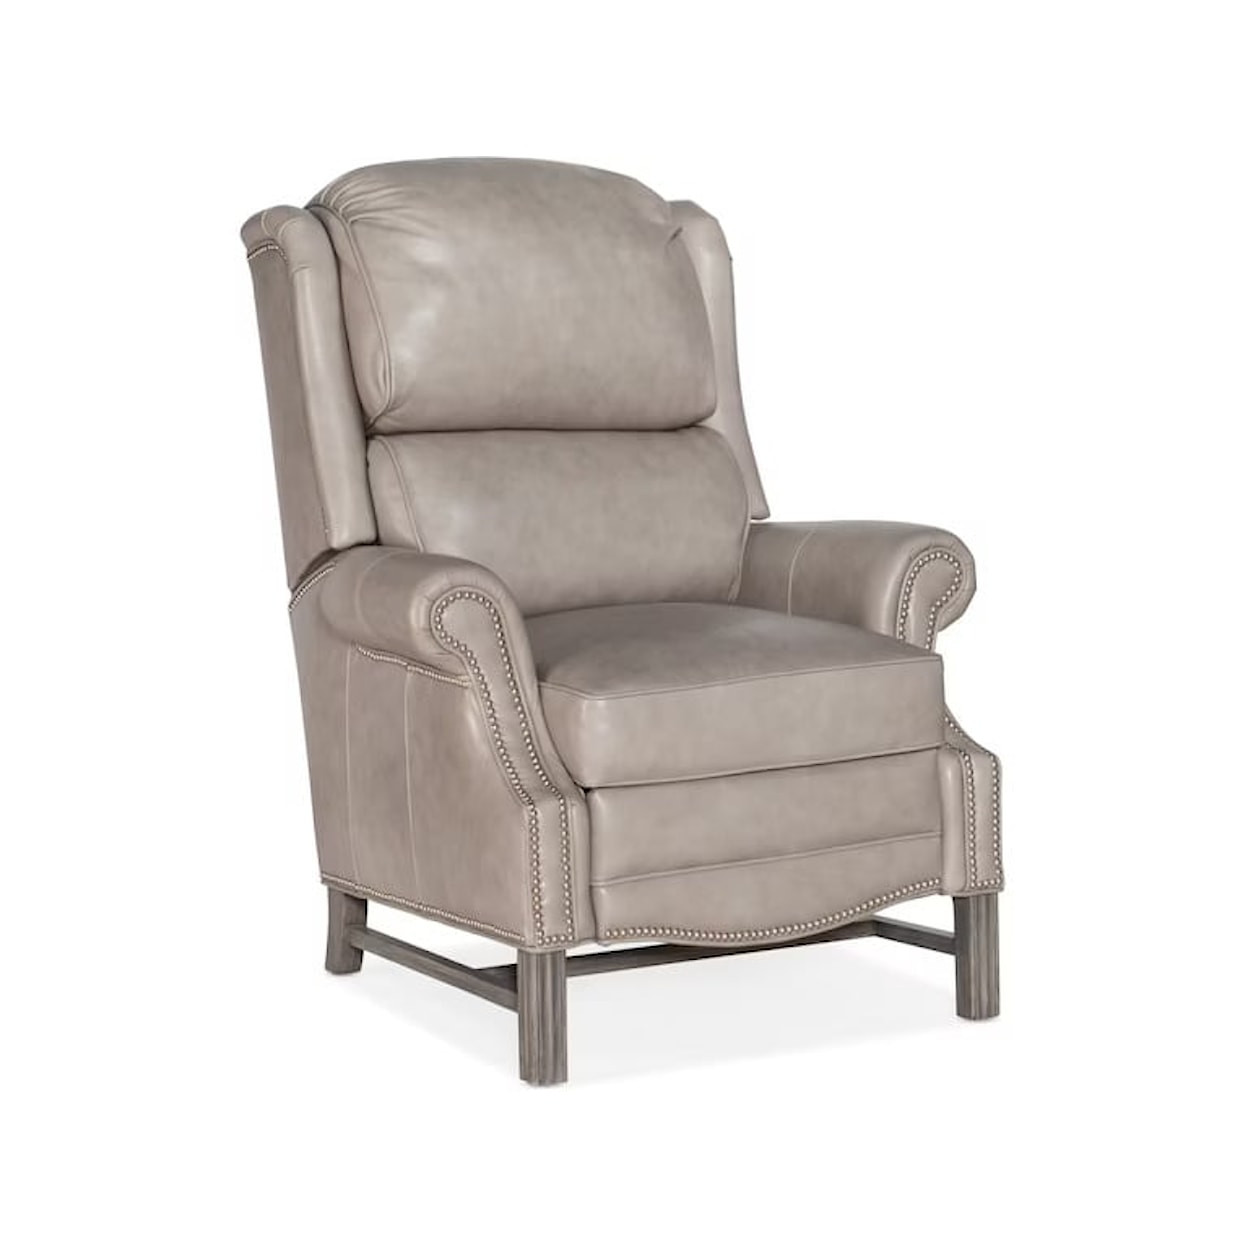 Bradington Young Chairs That Recline Recliner